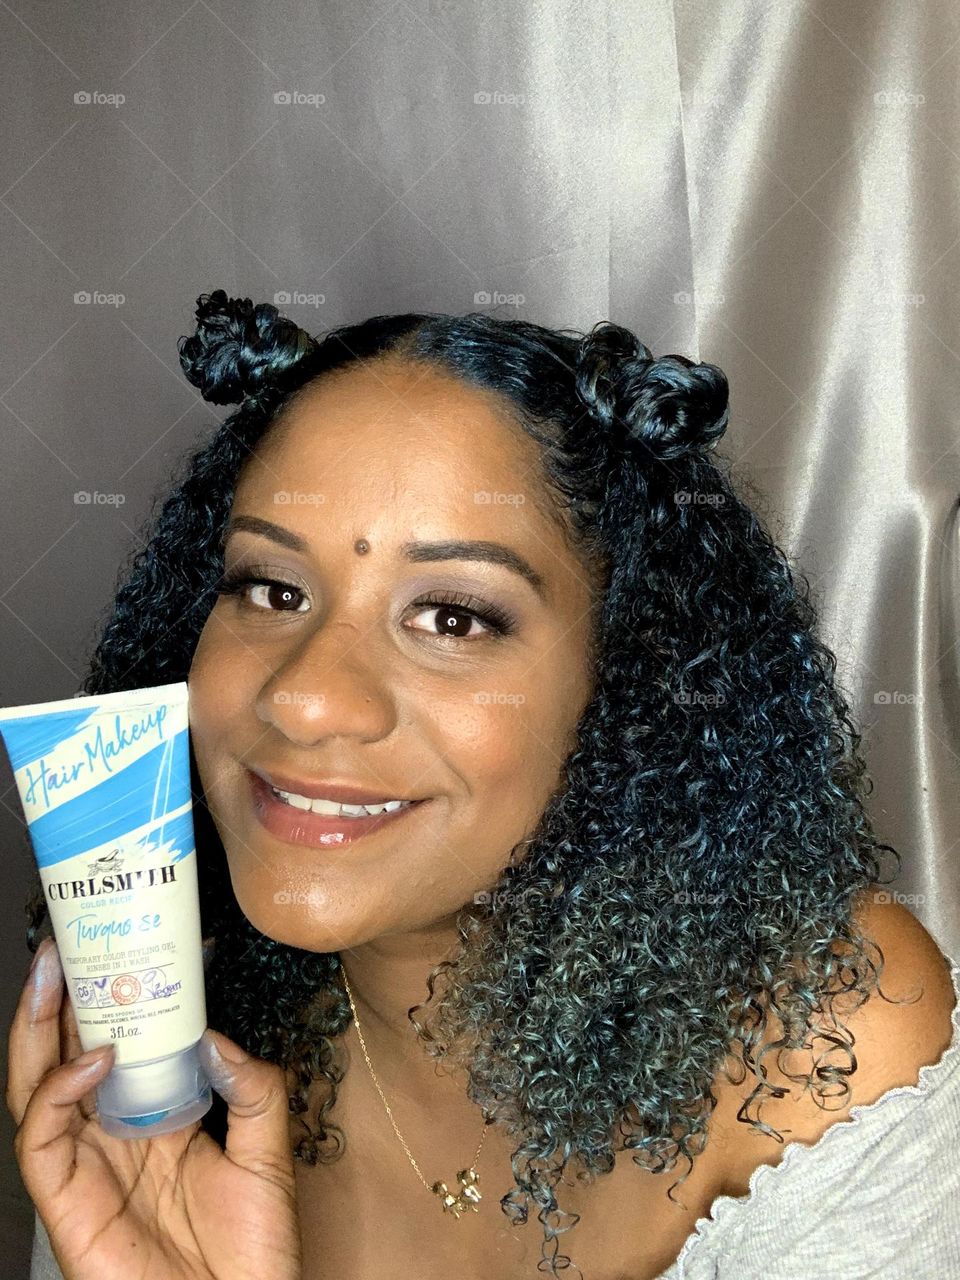 I absolutely love this hair makeup by Curl Smith. This is great when you want to switch up your look without any color damage. The product feels like a gel and rinses out with one wash. 